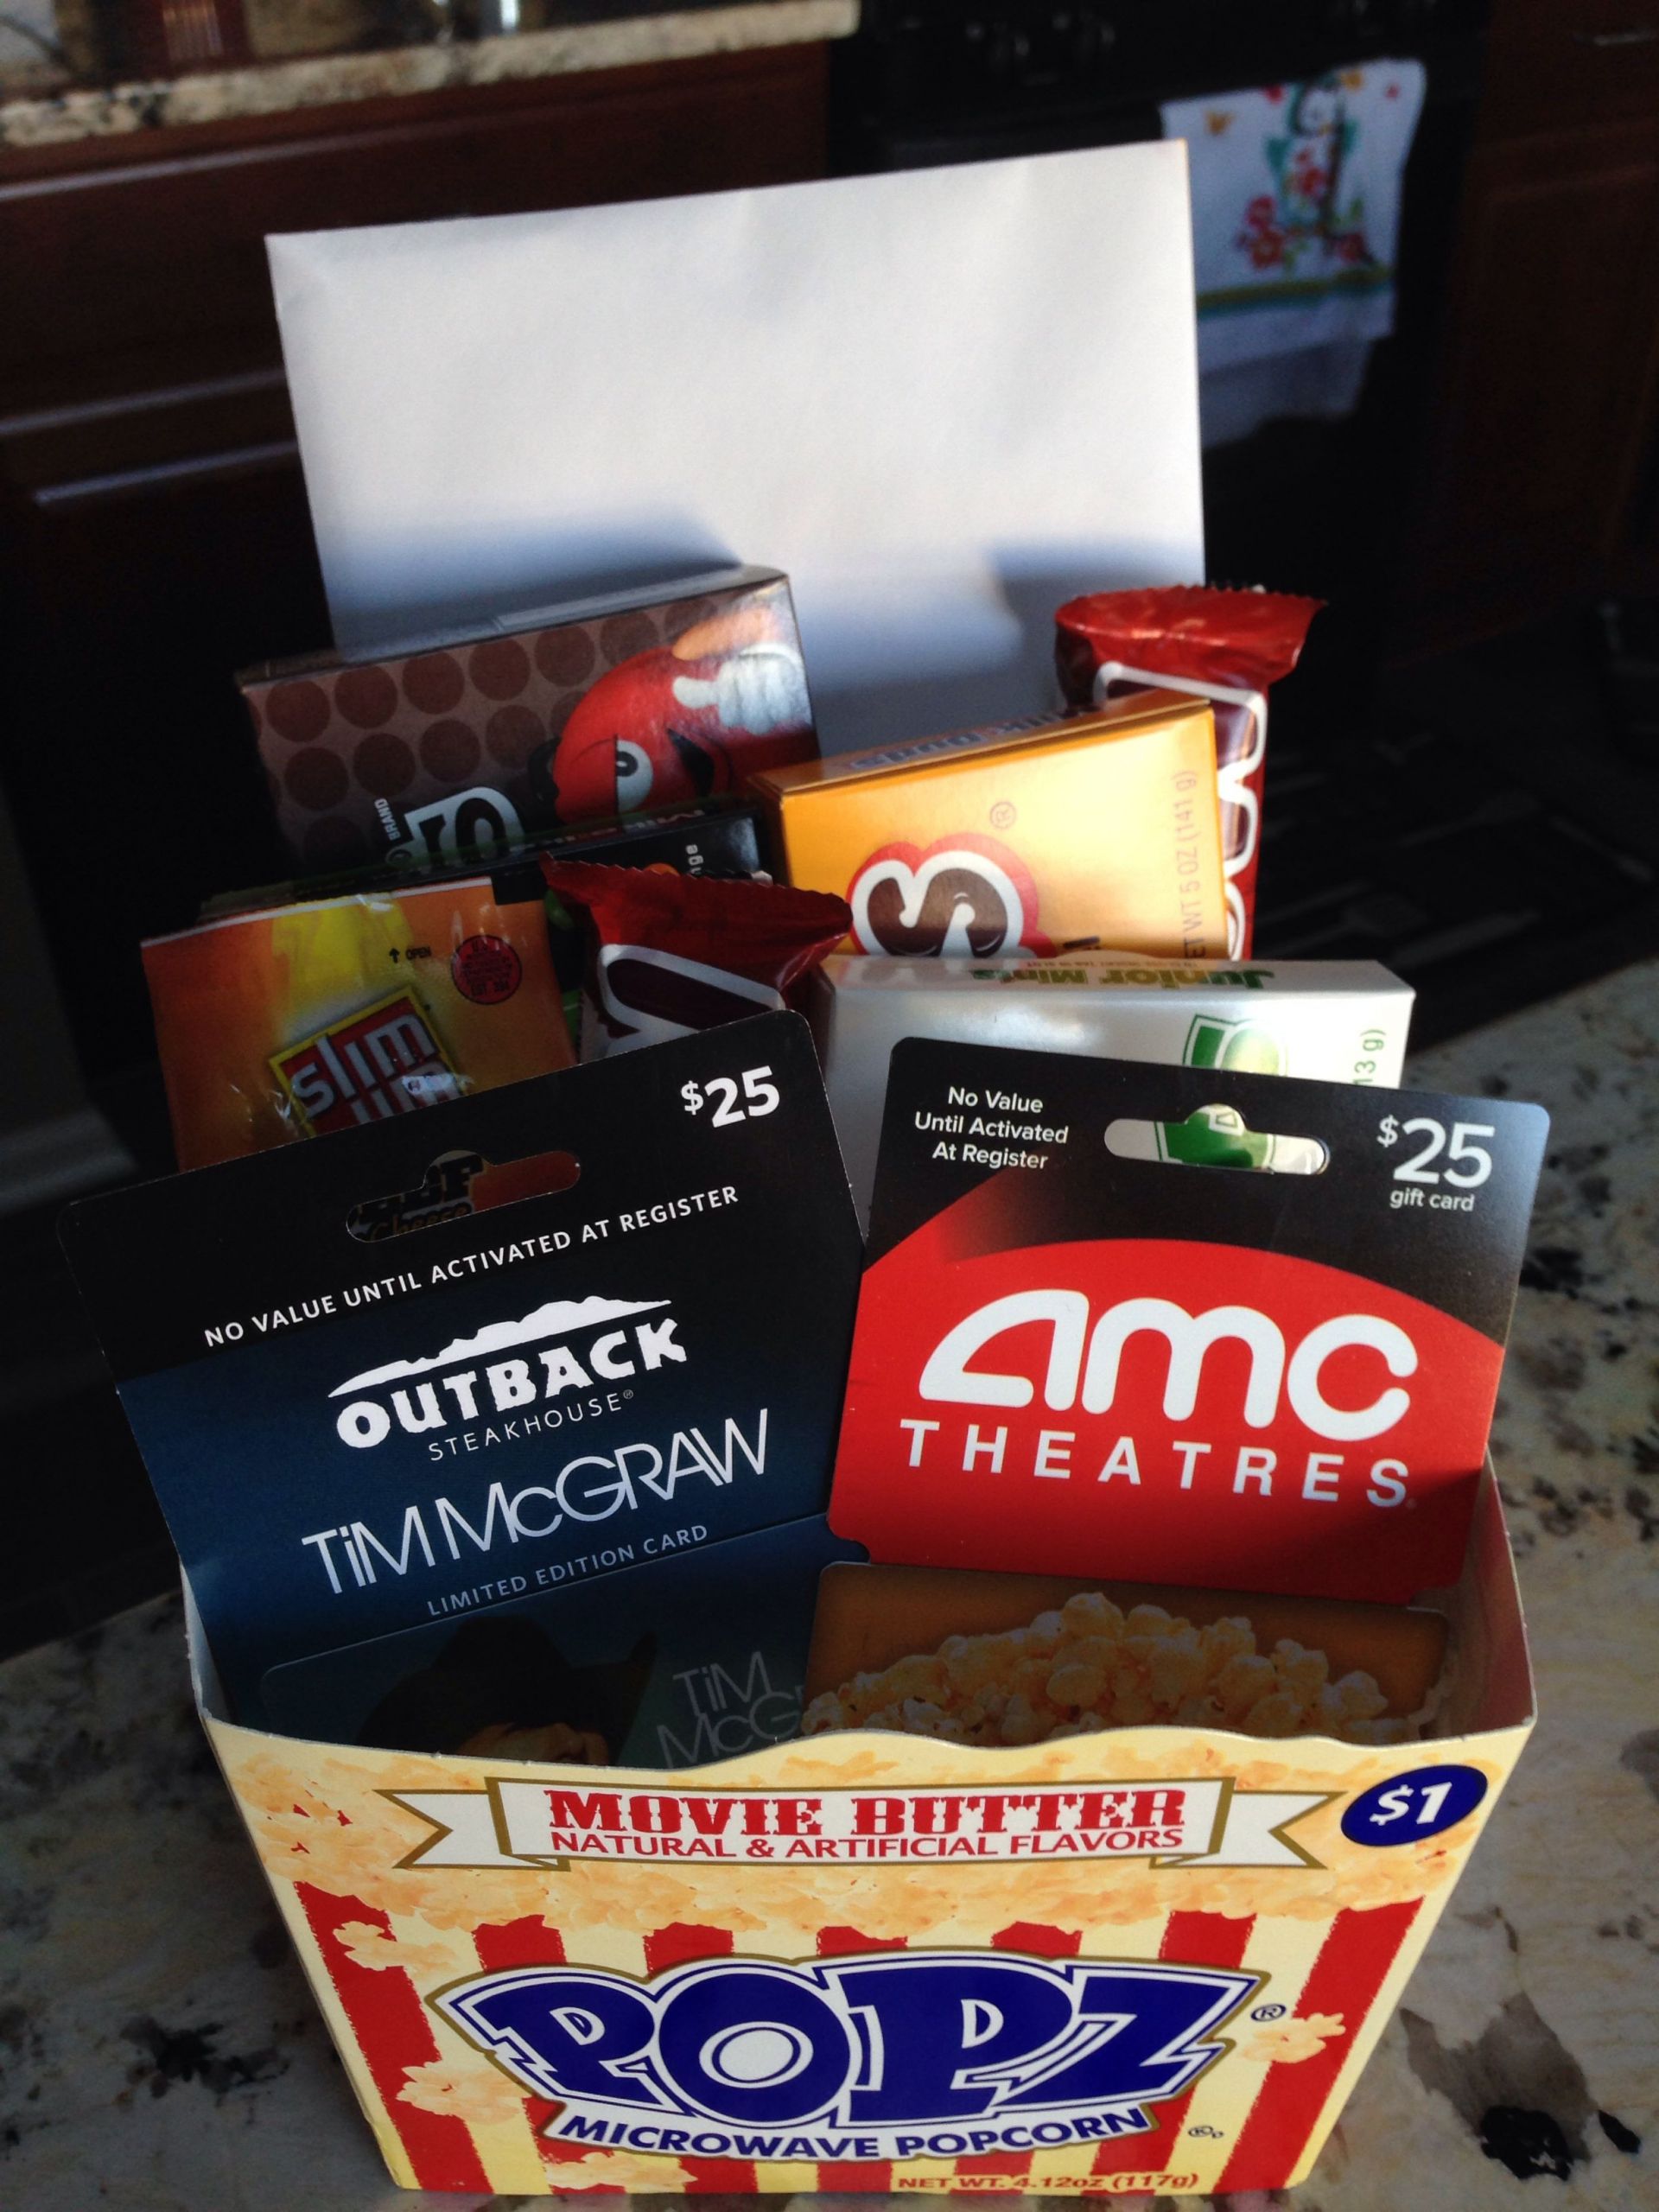 Dinner Gift Basket Ideas
 The perfect t for your movie lover "Dinner and a Movie